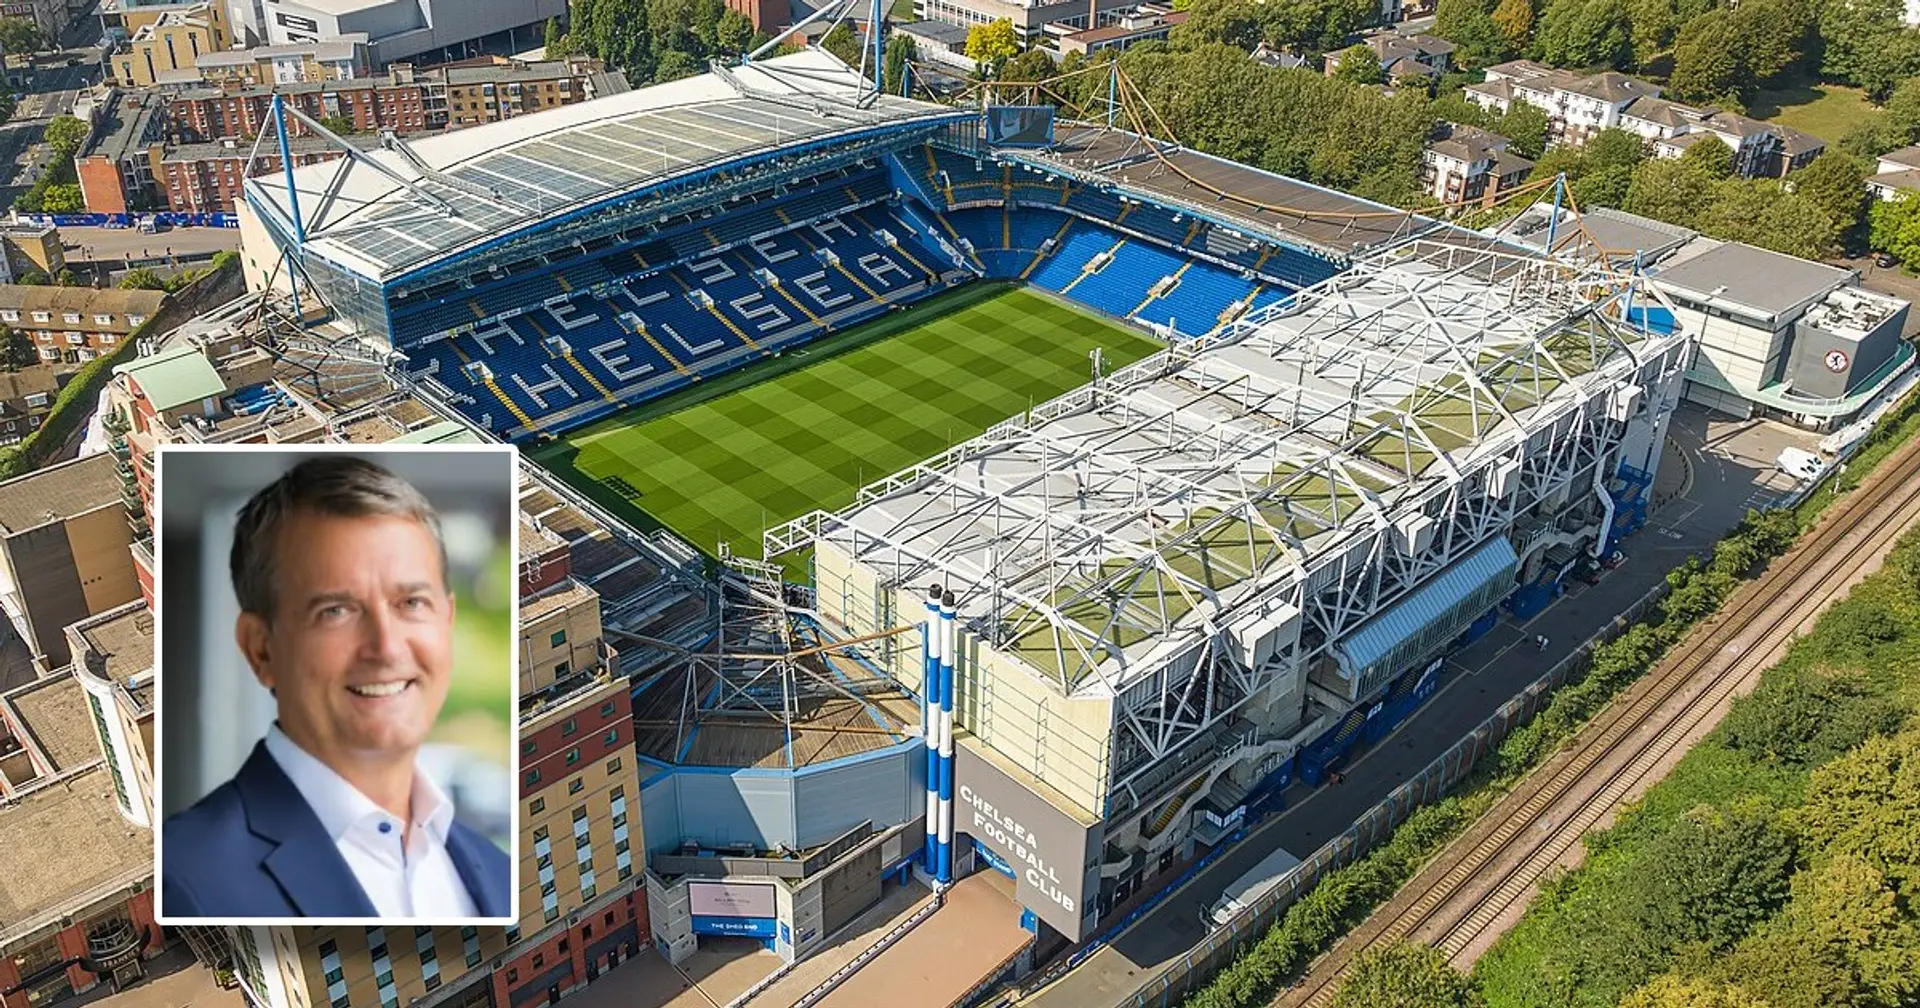 Chelsea appoint new task force to oversee £2bn Stamford Bridge redevelopment plan – they have three options